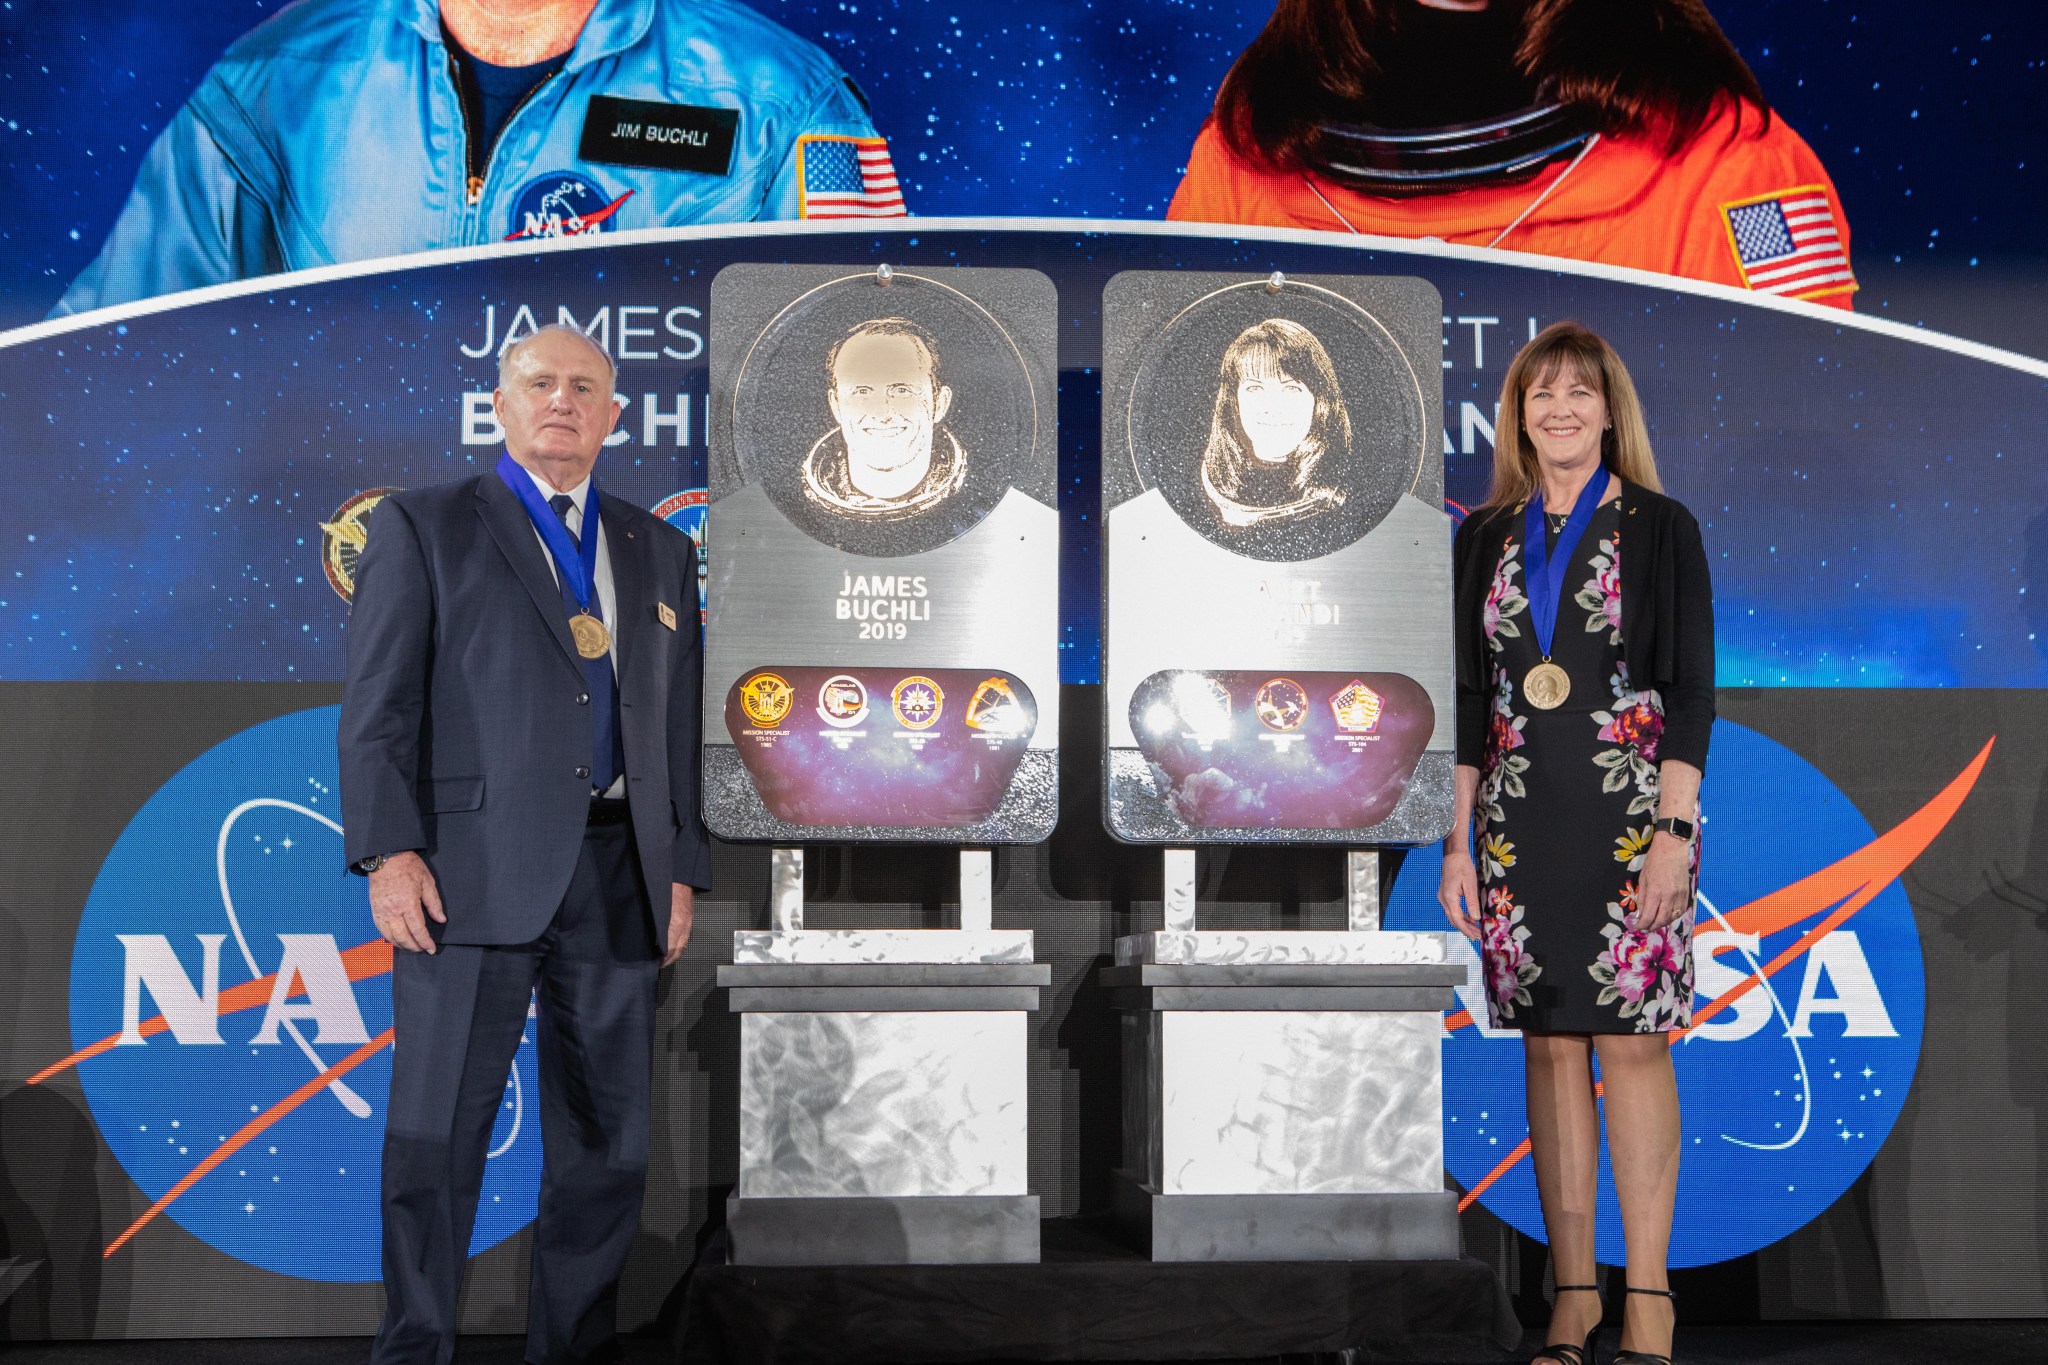 Former NASA astronauts Jim Buchli and Janet Kavandi are inducted into the U.S. Astronaut Hall of Fame Class of 2019